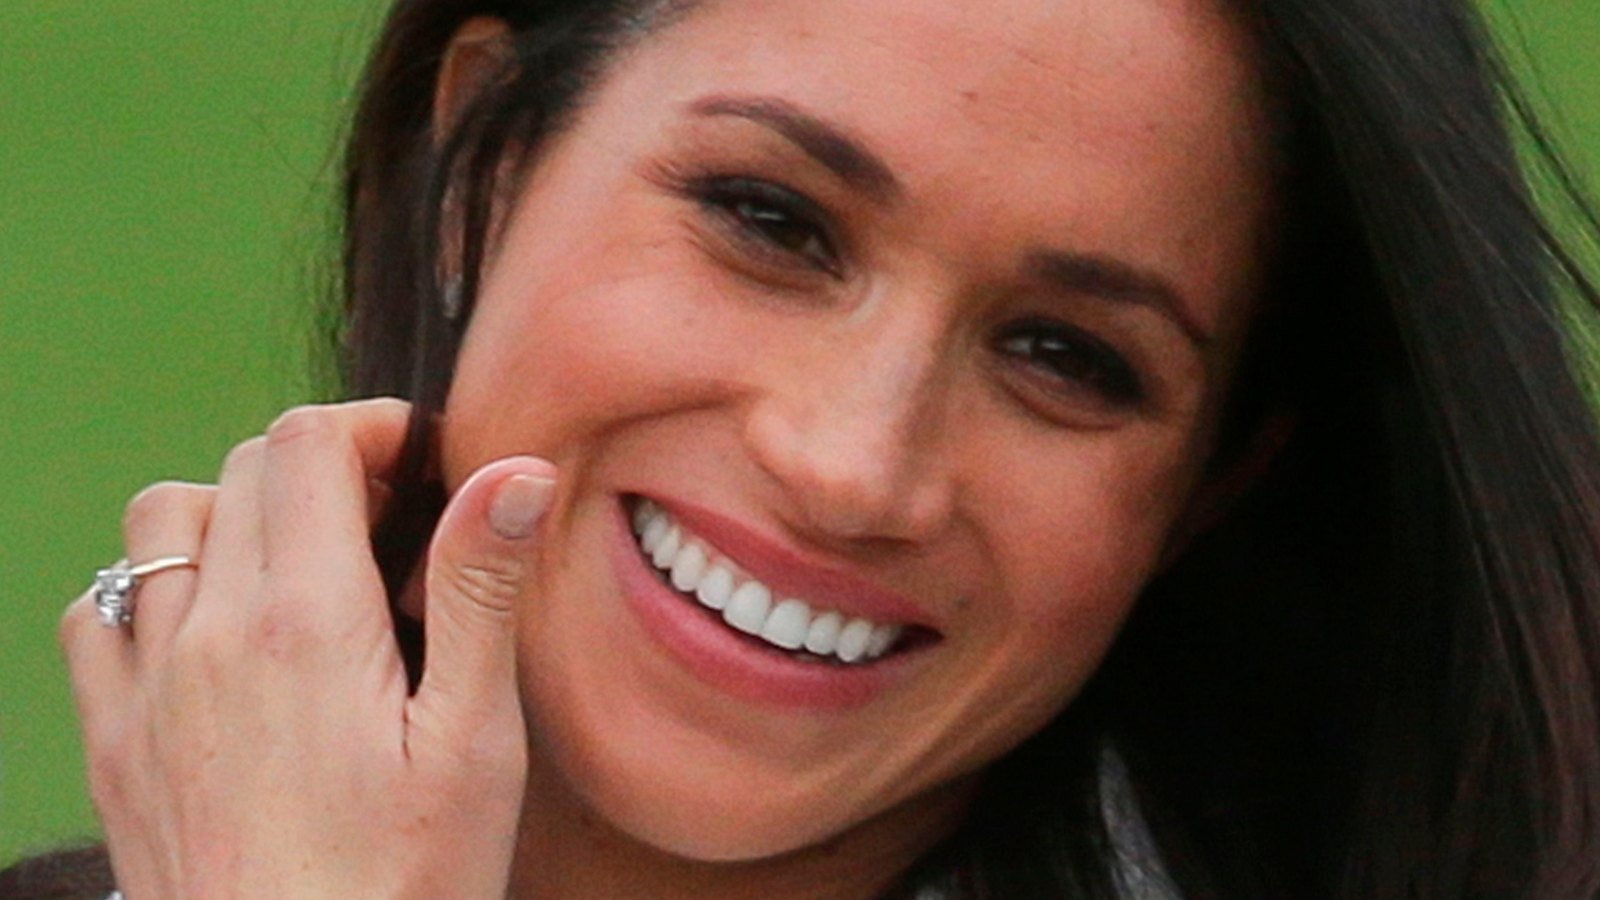 US actress Meghan Markle shows off her engagement ring she poses with her fiancée Britain's Prince Harry in the Sunken Garden at Kensington Palace in west London on November 27, 2017, following the announcement of their engagement. - Britain's Prince Harry will marry his US actress girlfriend Meghan Markle early next year after the couple became engaged earlier this month, Clarence House announced on Monday. (Photo by Daniel LEAL-OLIVAS / AFP) (Photo credit should read DANIEL LEAL-OLIVAS/AFP/Getty Images)